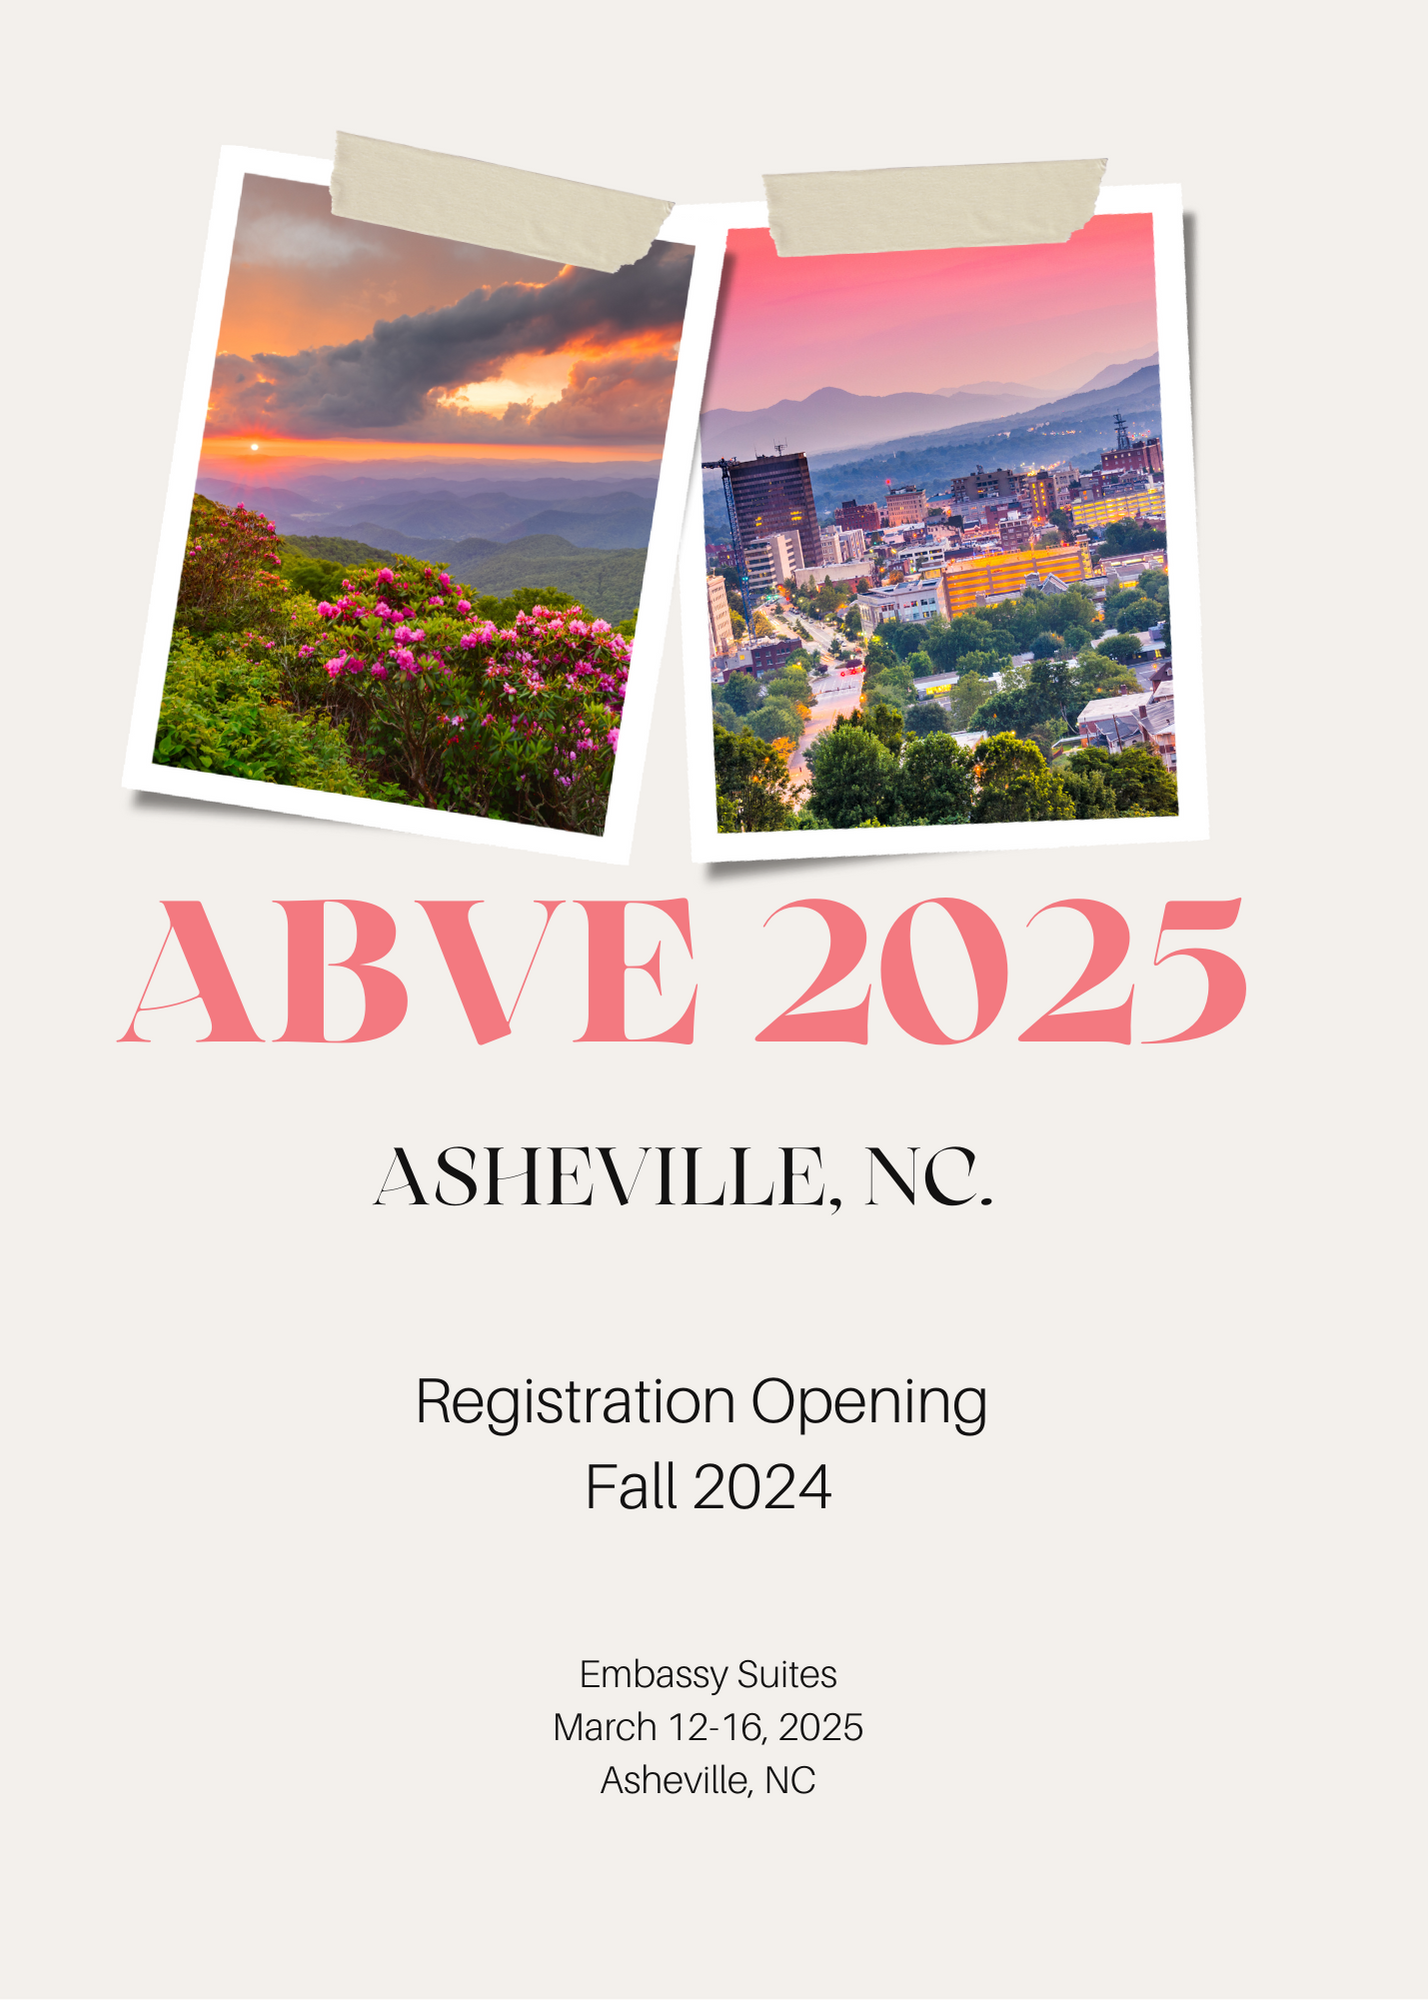 ABVE 2025 Conference